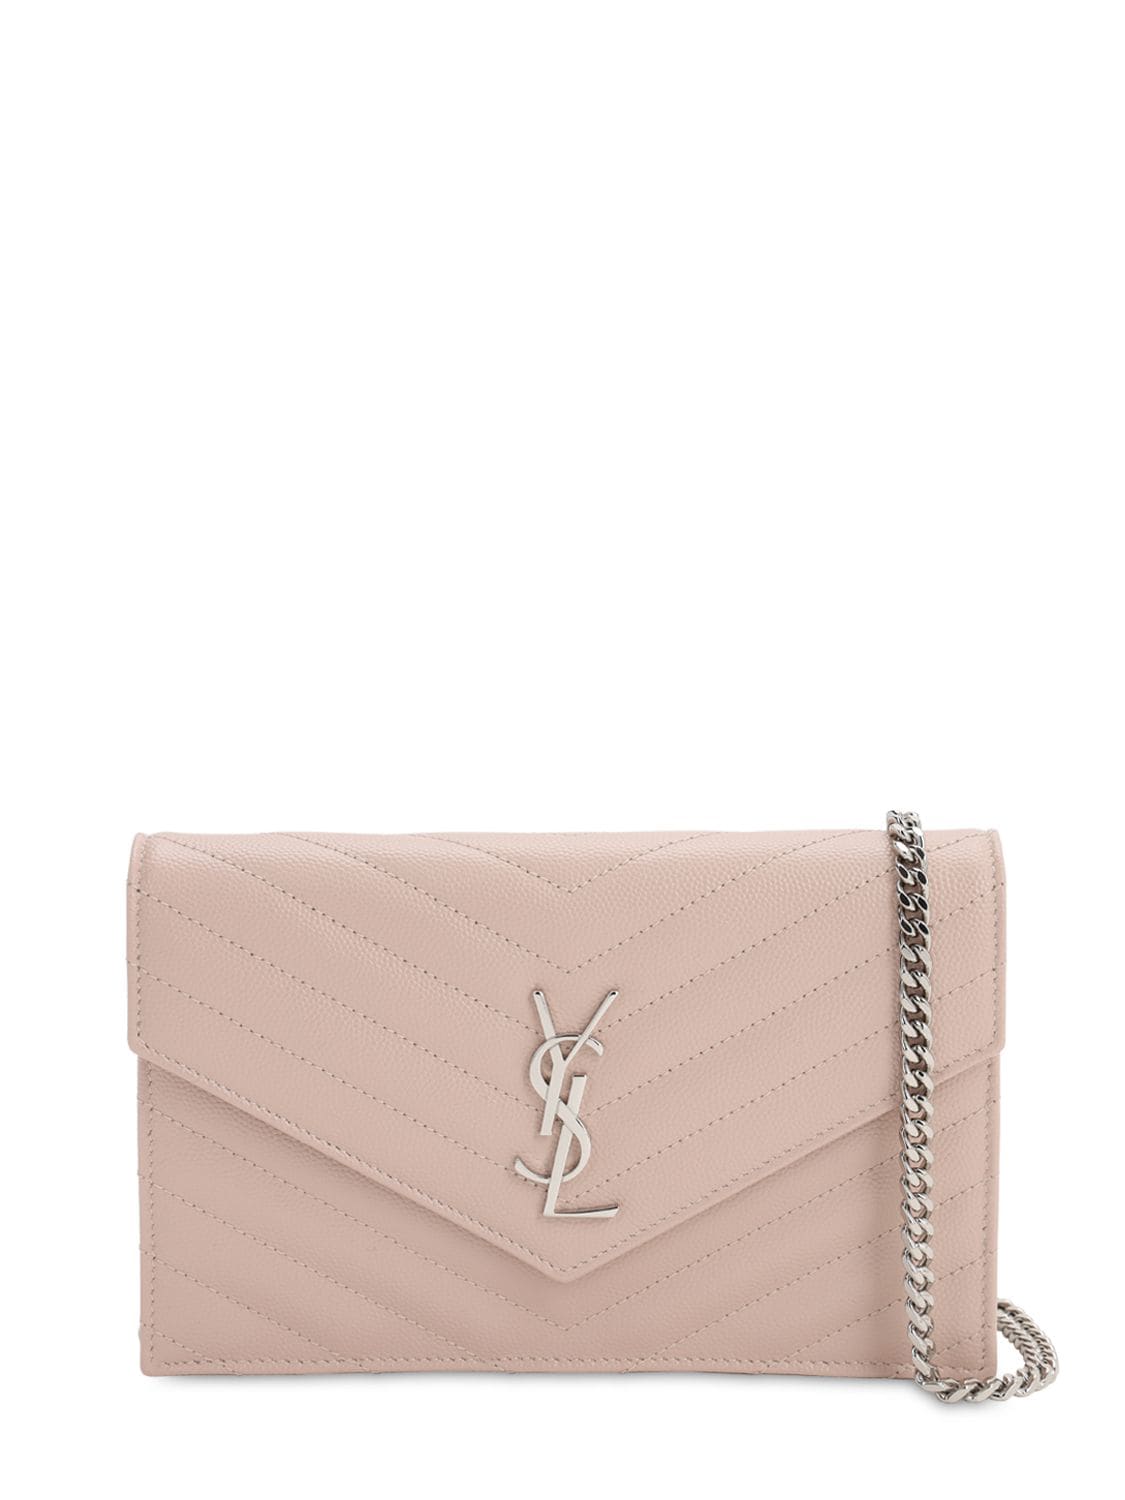 Saint Laurent Sm Monogram Quilted Leather Bag In Marble Pink